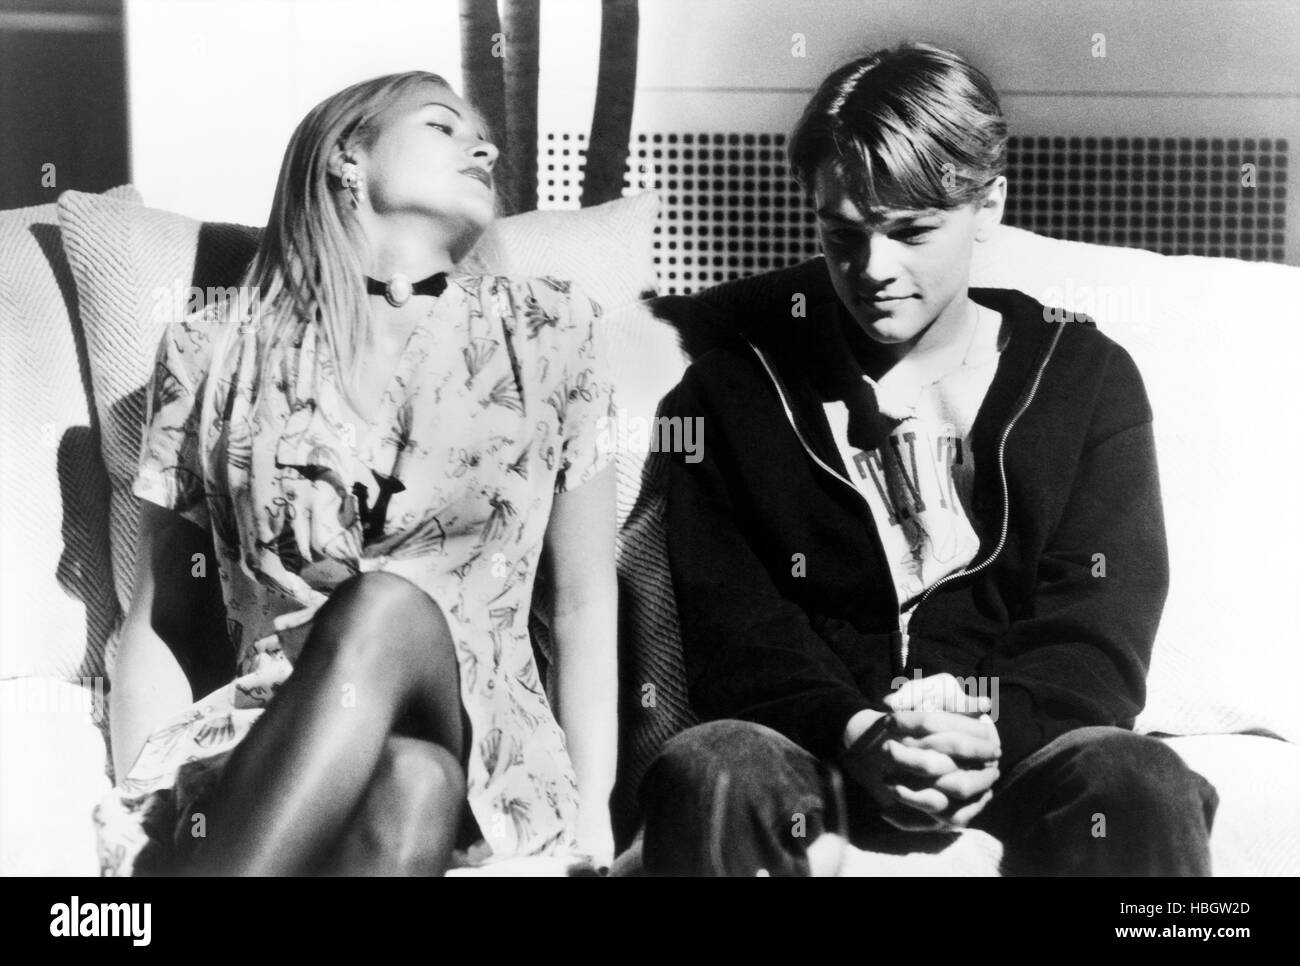 THE BASKETBALL DIARIES, from left: Brittany Daniel, Leonardo DiCaprio,  1995. ©New Line/courtesy Everett Collection Stock Photo - Alamy